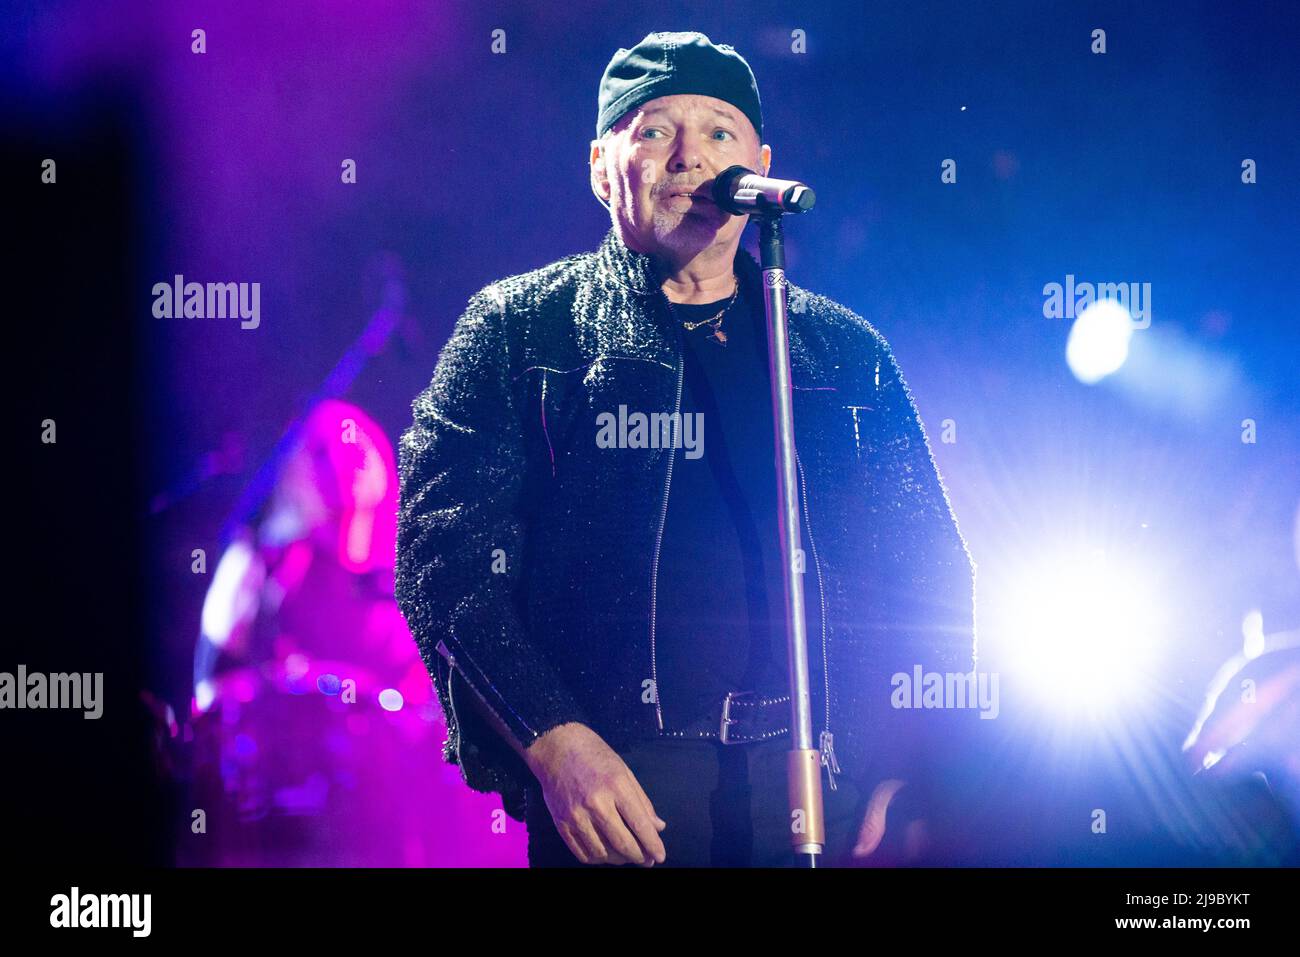 Vasco Rossi performed last 20.5.22 at Trentino music arena in Trento (Italy) for 120.000 people. the first date of tour 2022 after 3 years Stock Photo